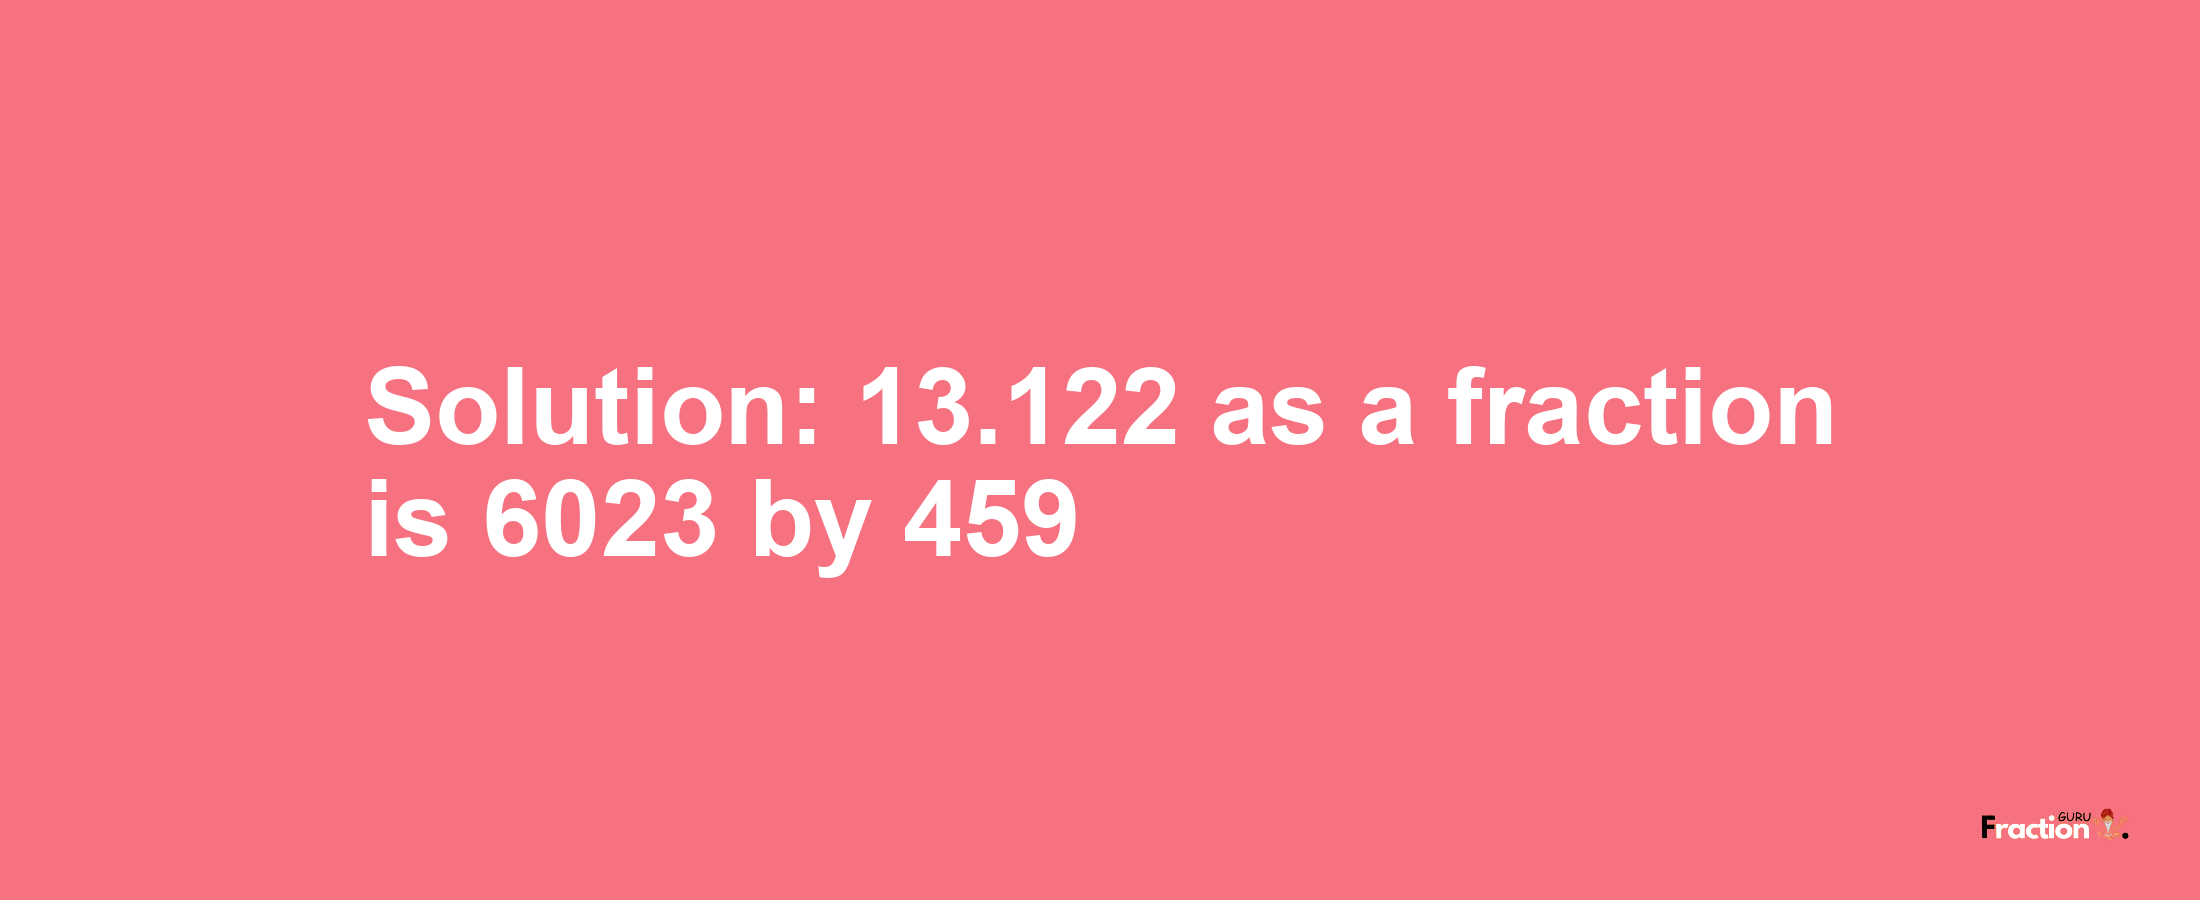 Solution:13.122 as a fraction is 6023/459